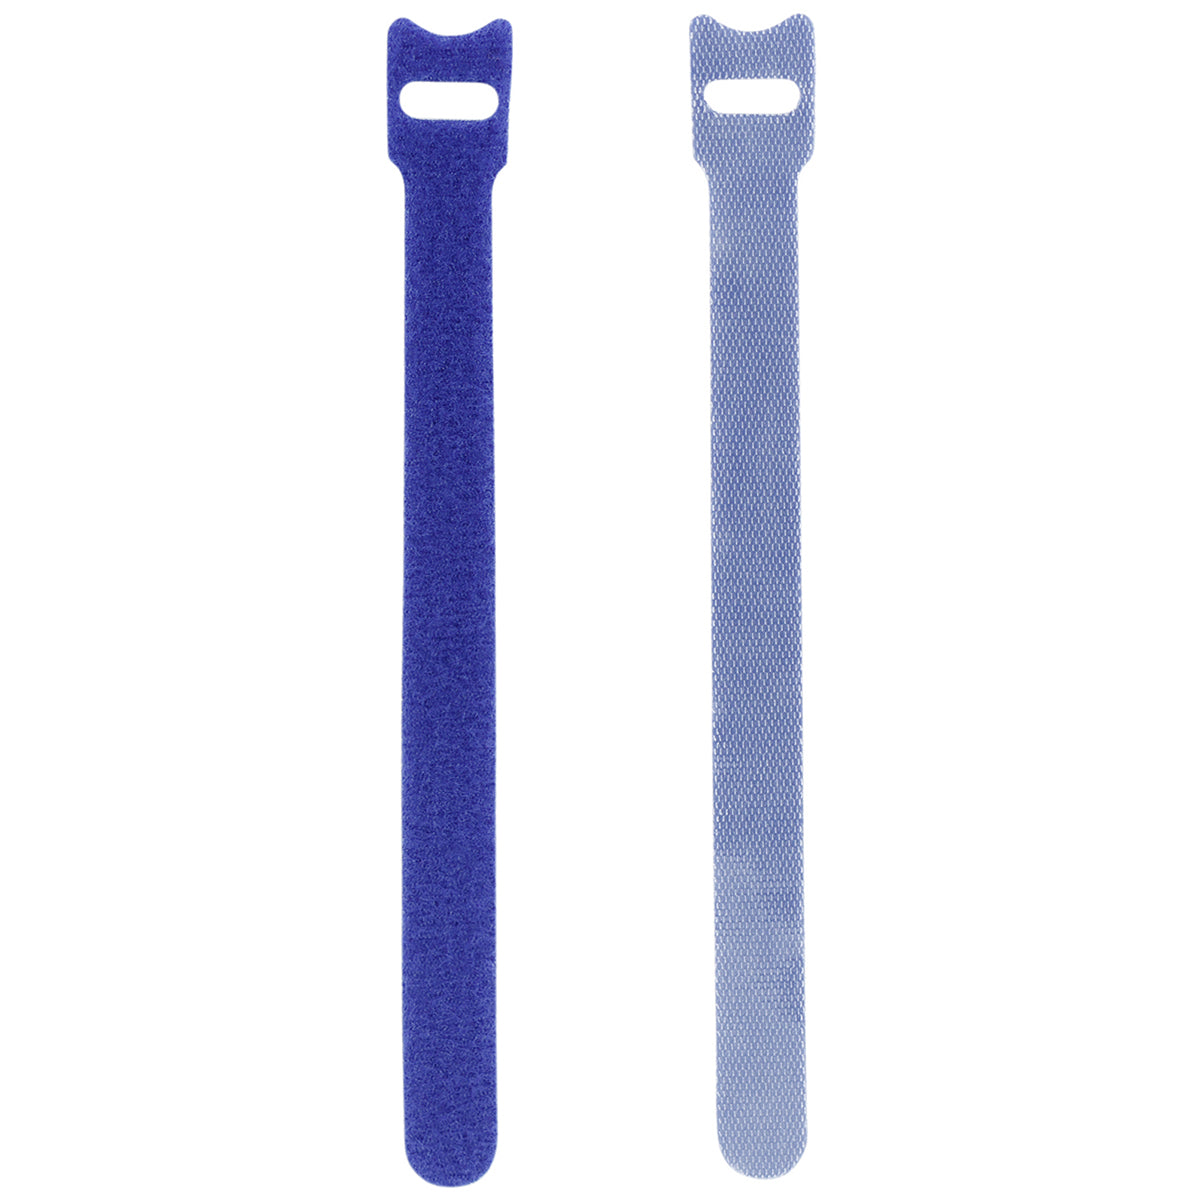 Displaying of two upright blue nylon cable ties  